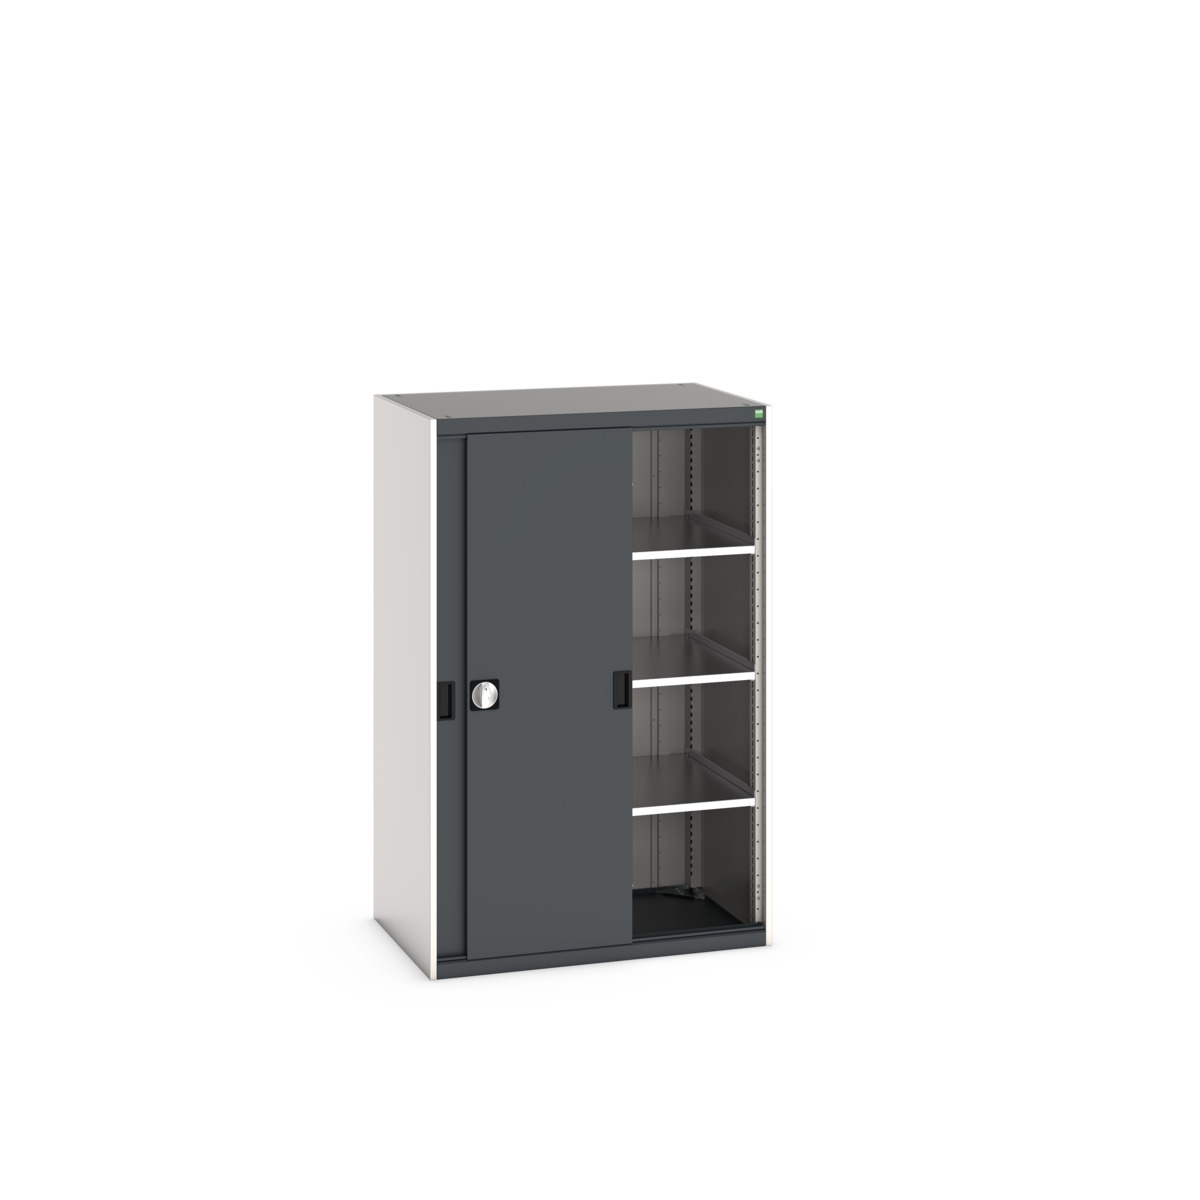 40021214.19V - Armoire Cubio SMS-10616-1